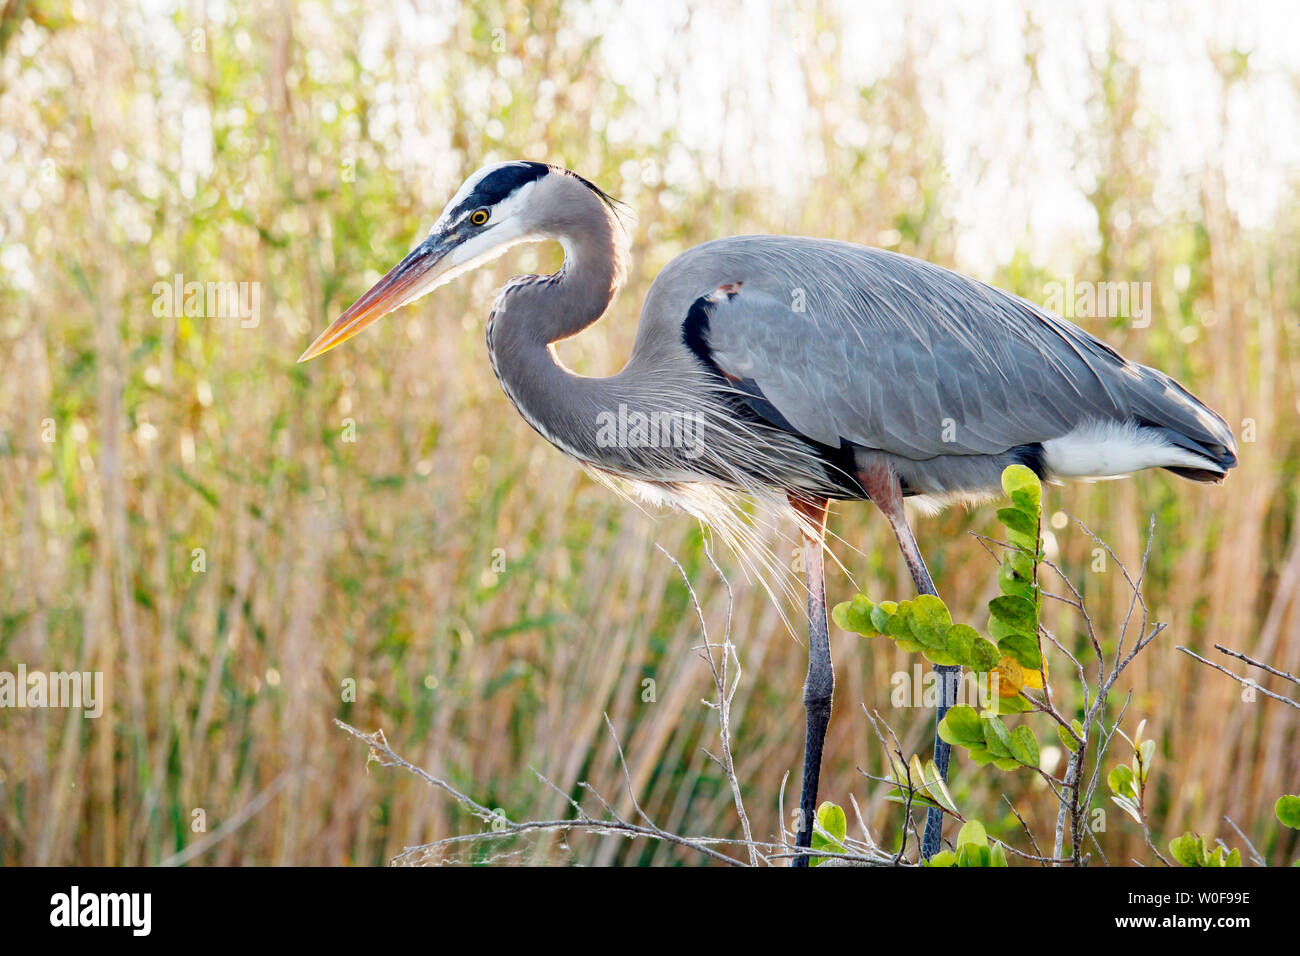 USA. Florida. Everglades National Park. Anhinga Trail. Close-up of a great heron during the hunt. Stock Photo